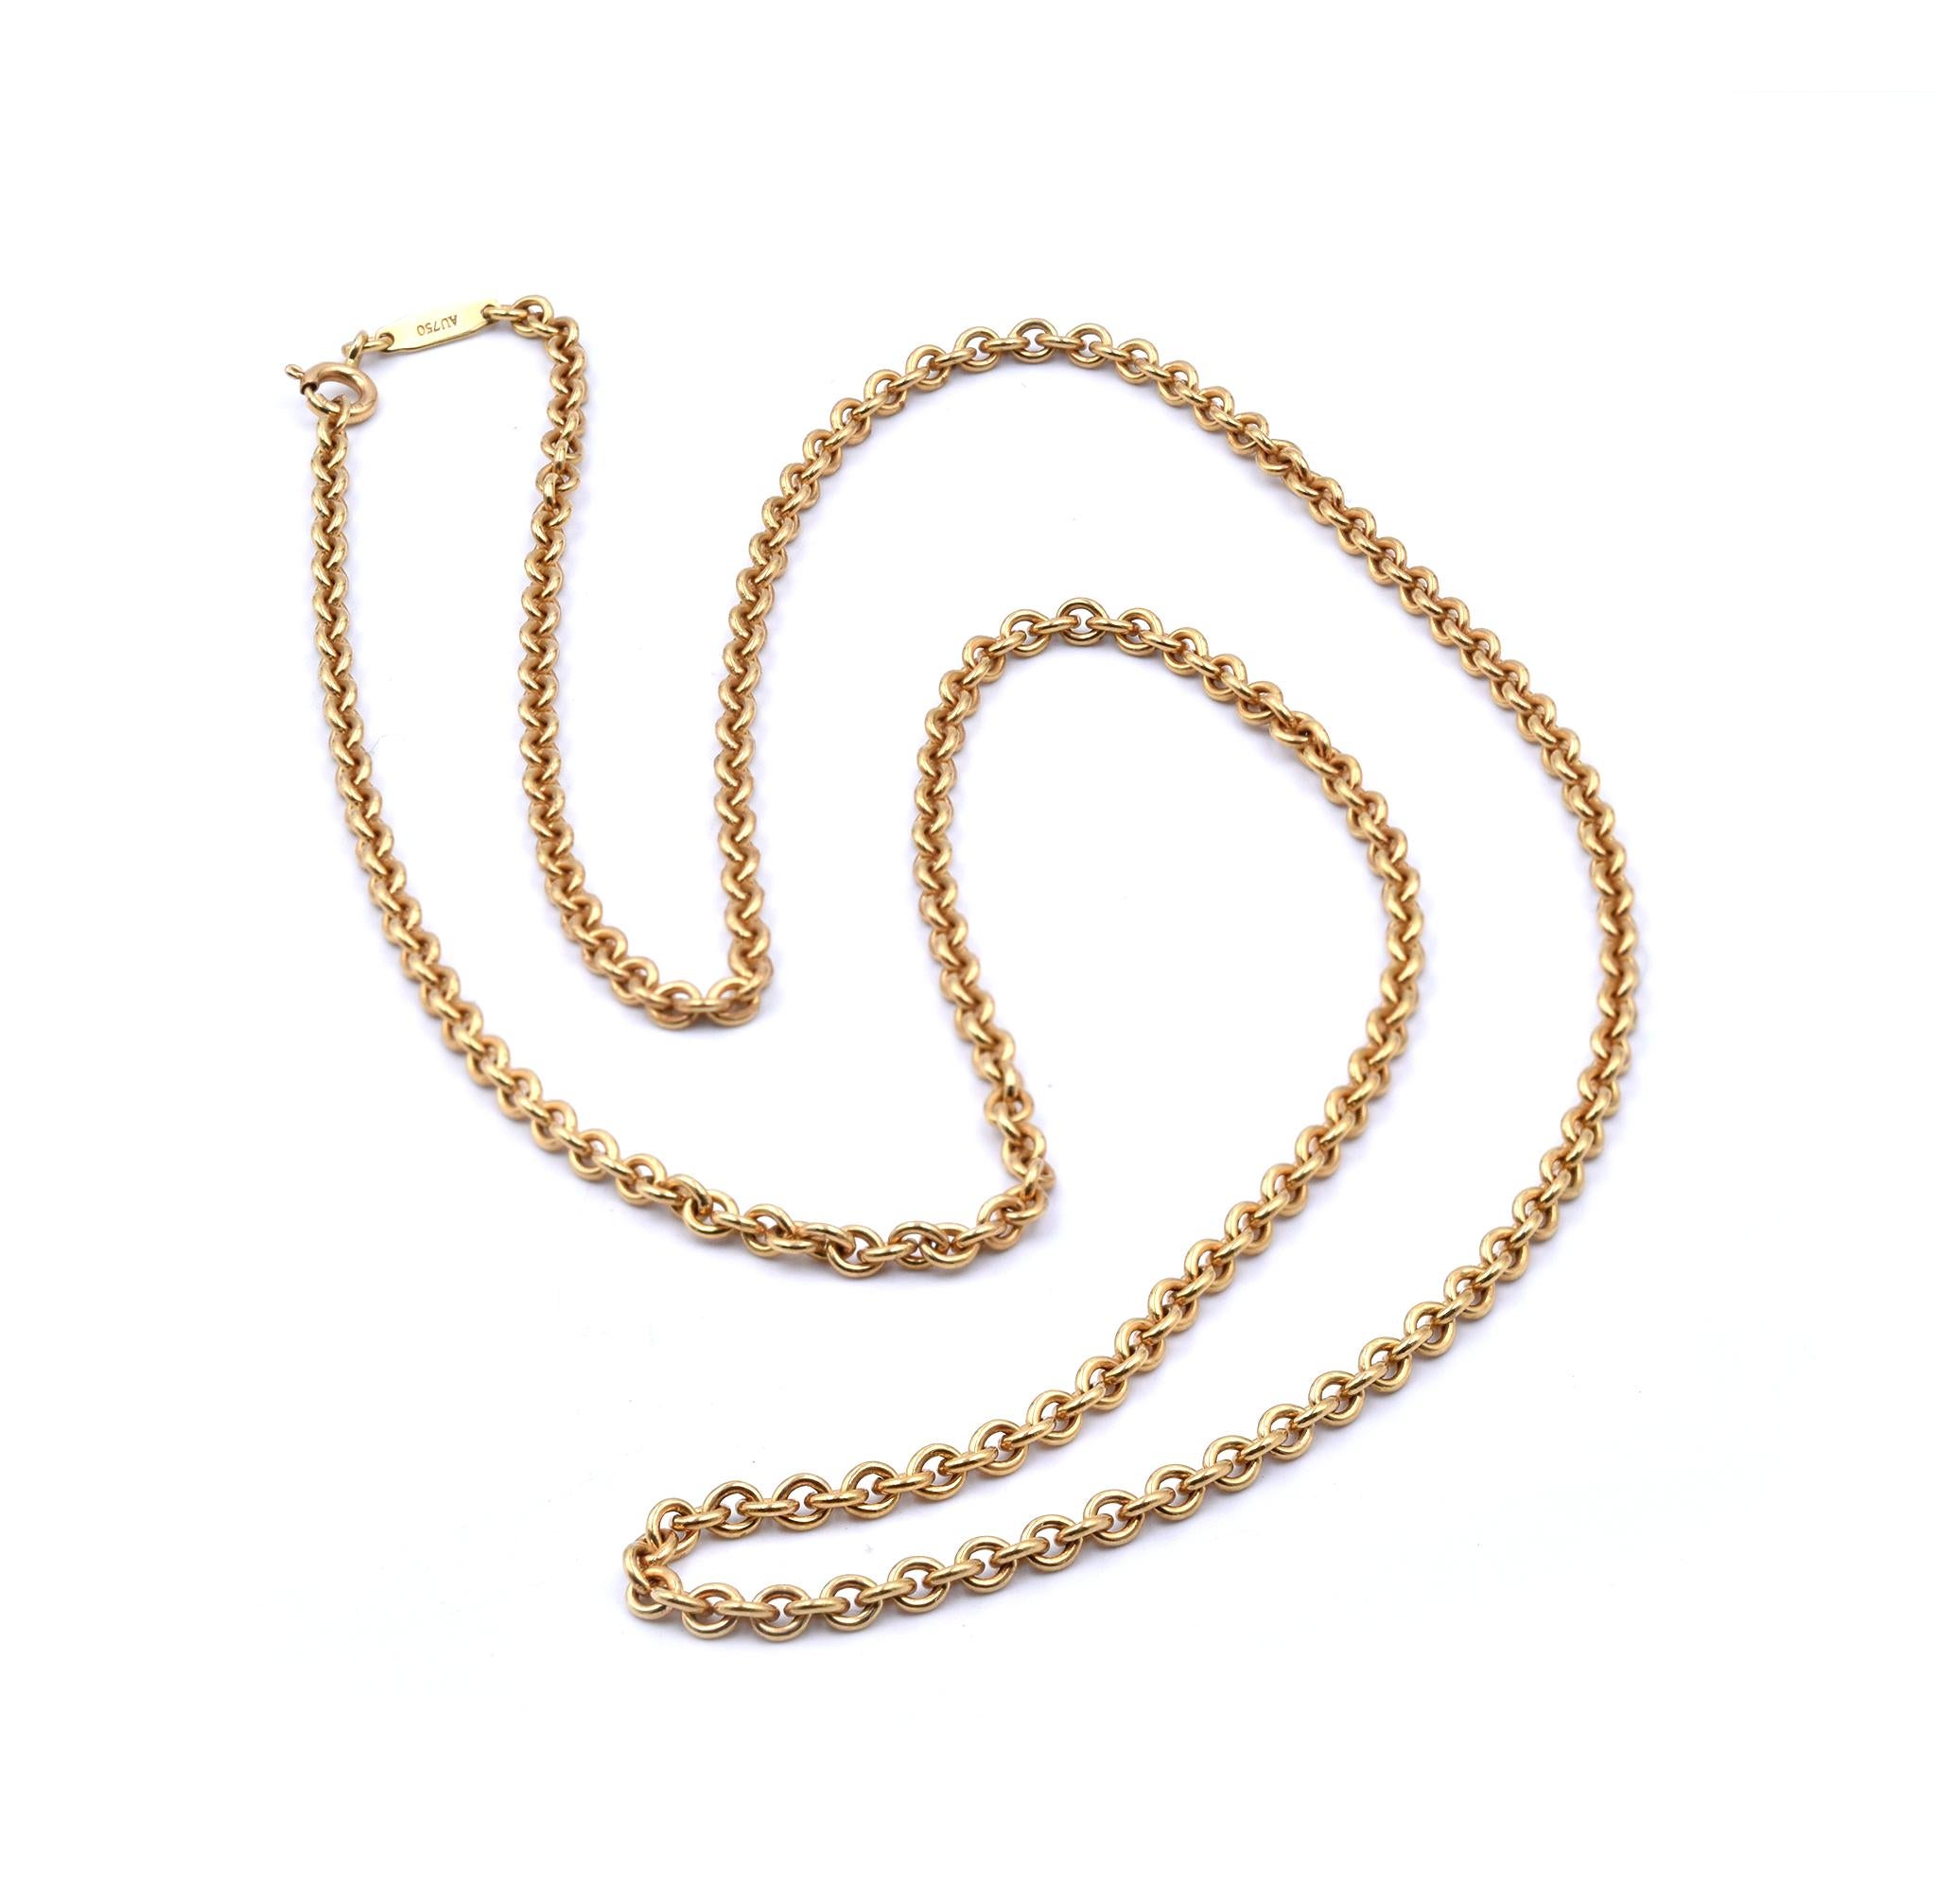 Designer: Tiffany & Co.
Material: 18k yellow gold 
Dimensions: necklace measures 24-inches 
Weight: 17.5 grams
